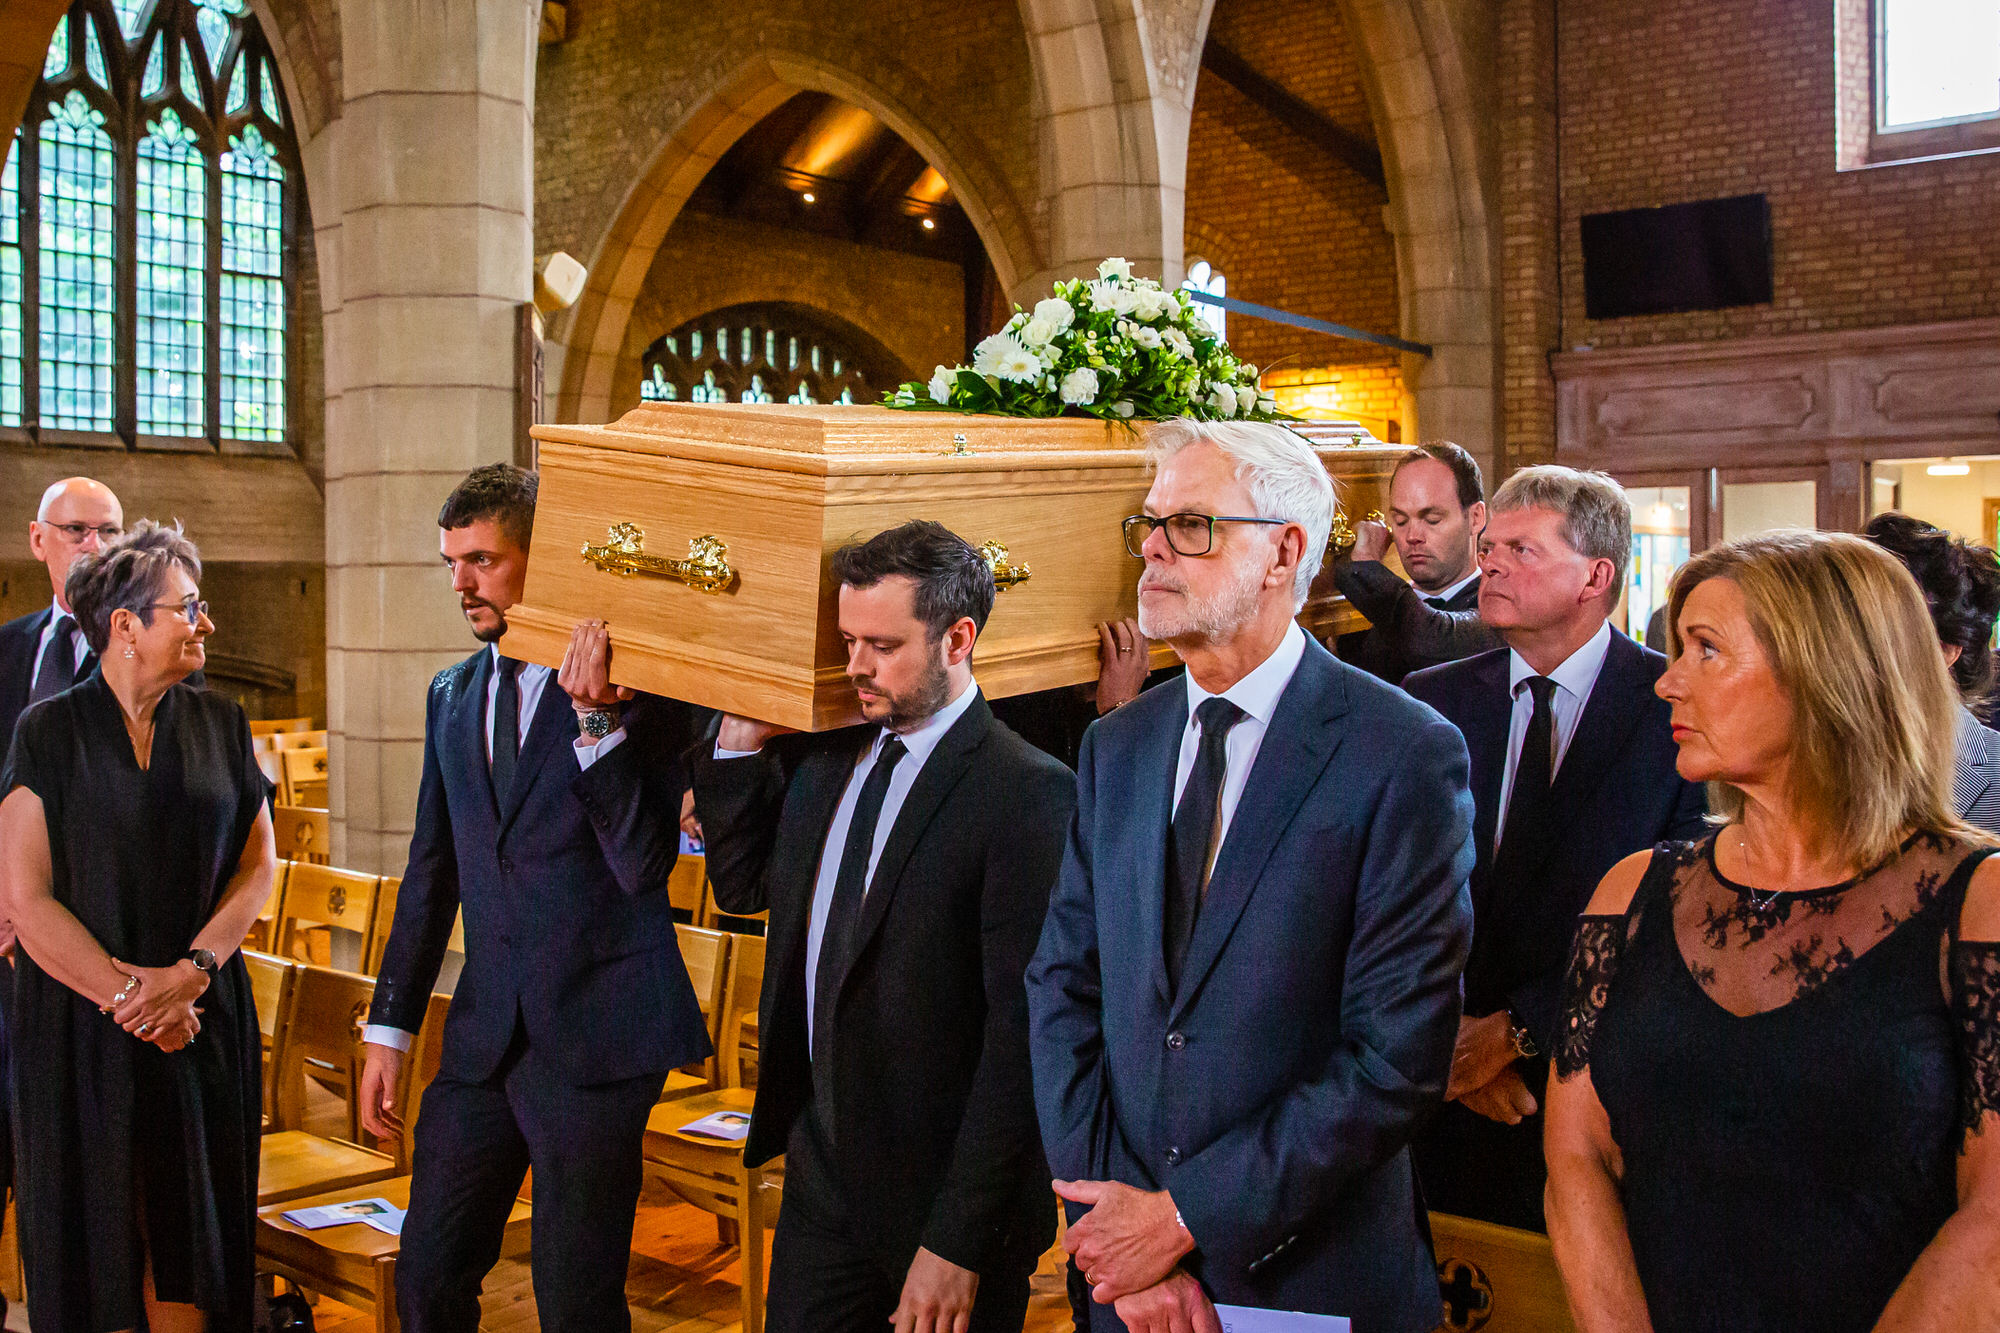 London Funeral Photographers and Funeral Photography